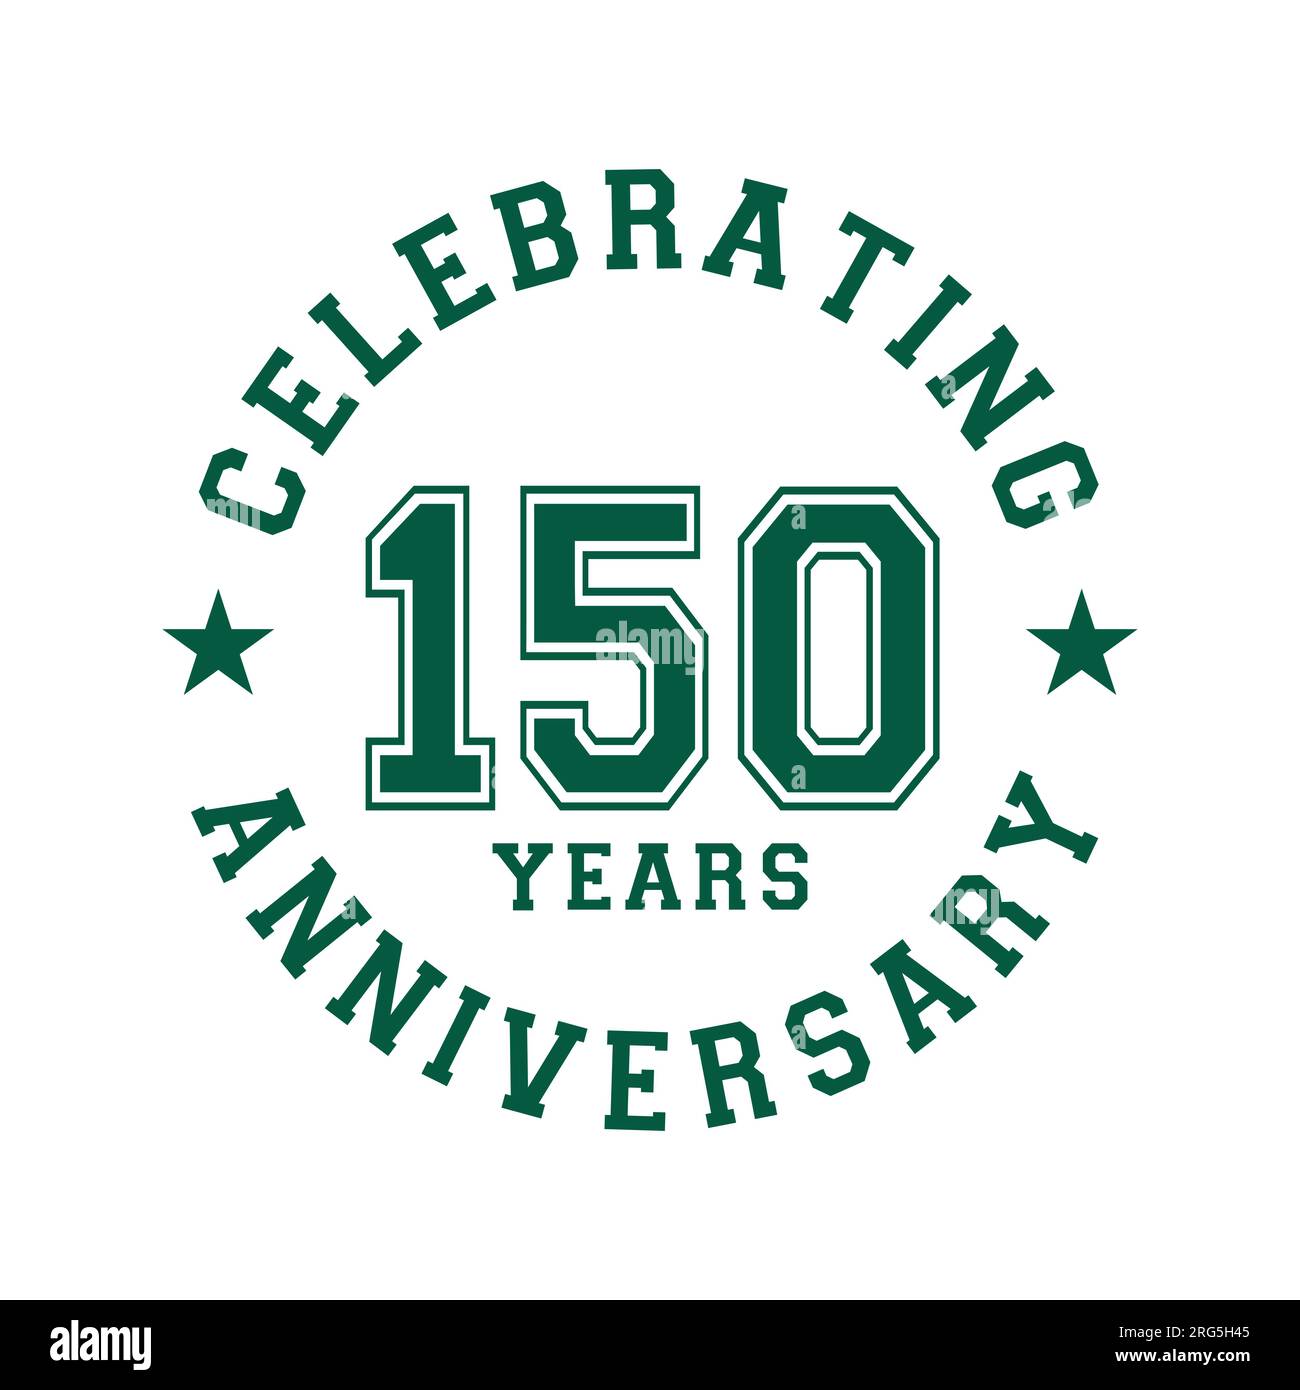 150 Years Logo Cut Out Stock Images And Pictures Alamy